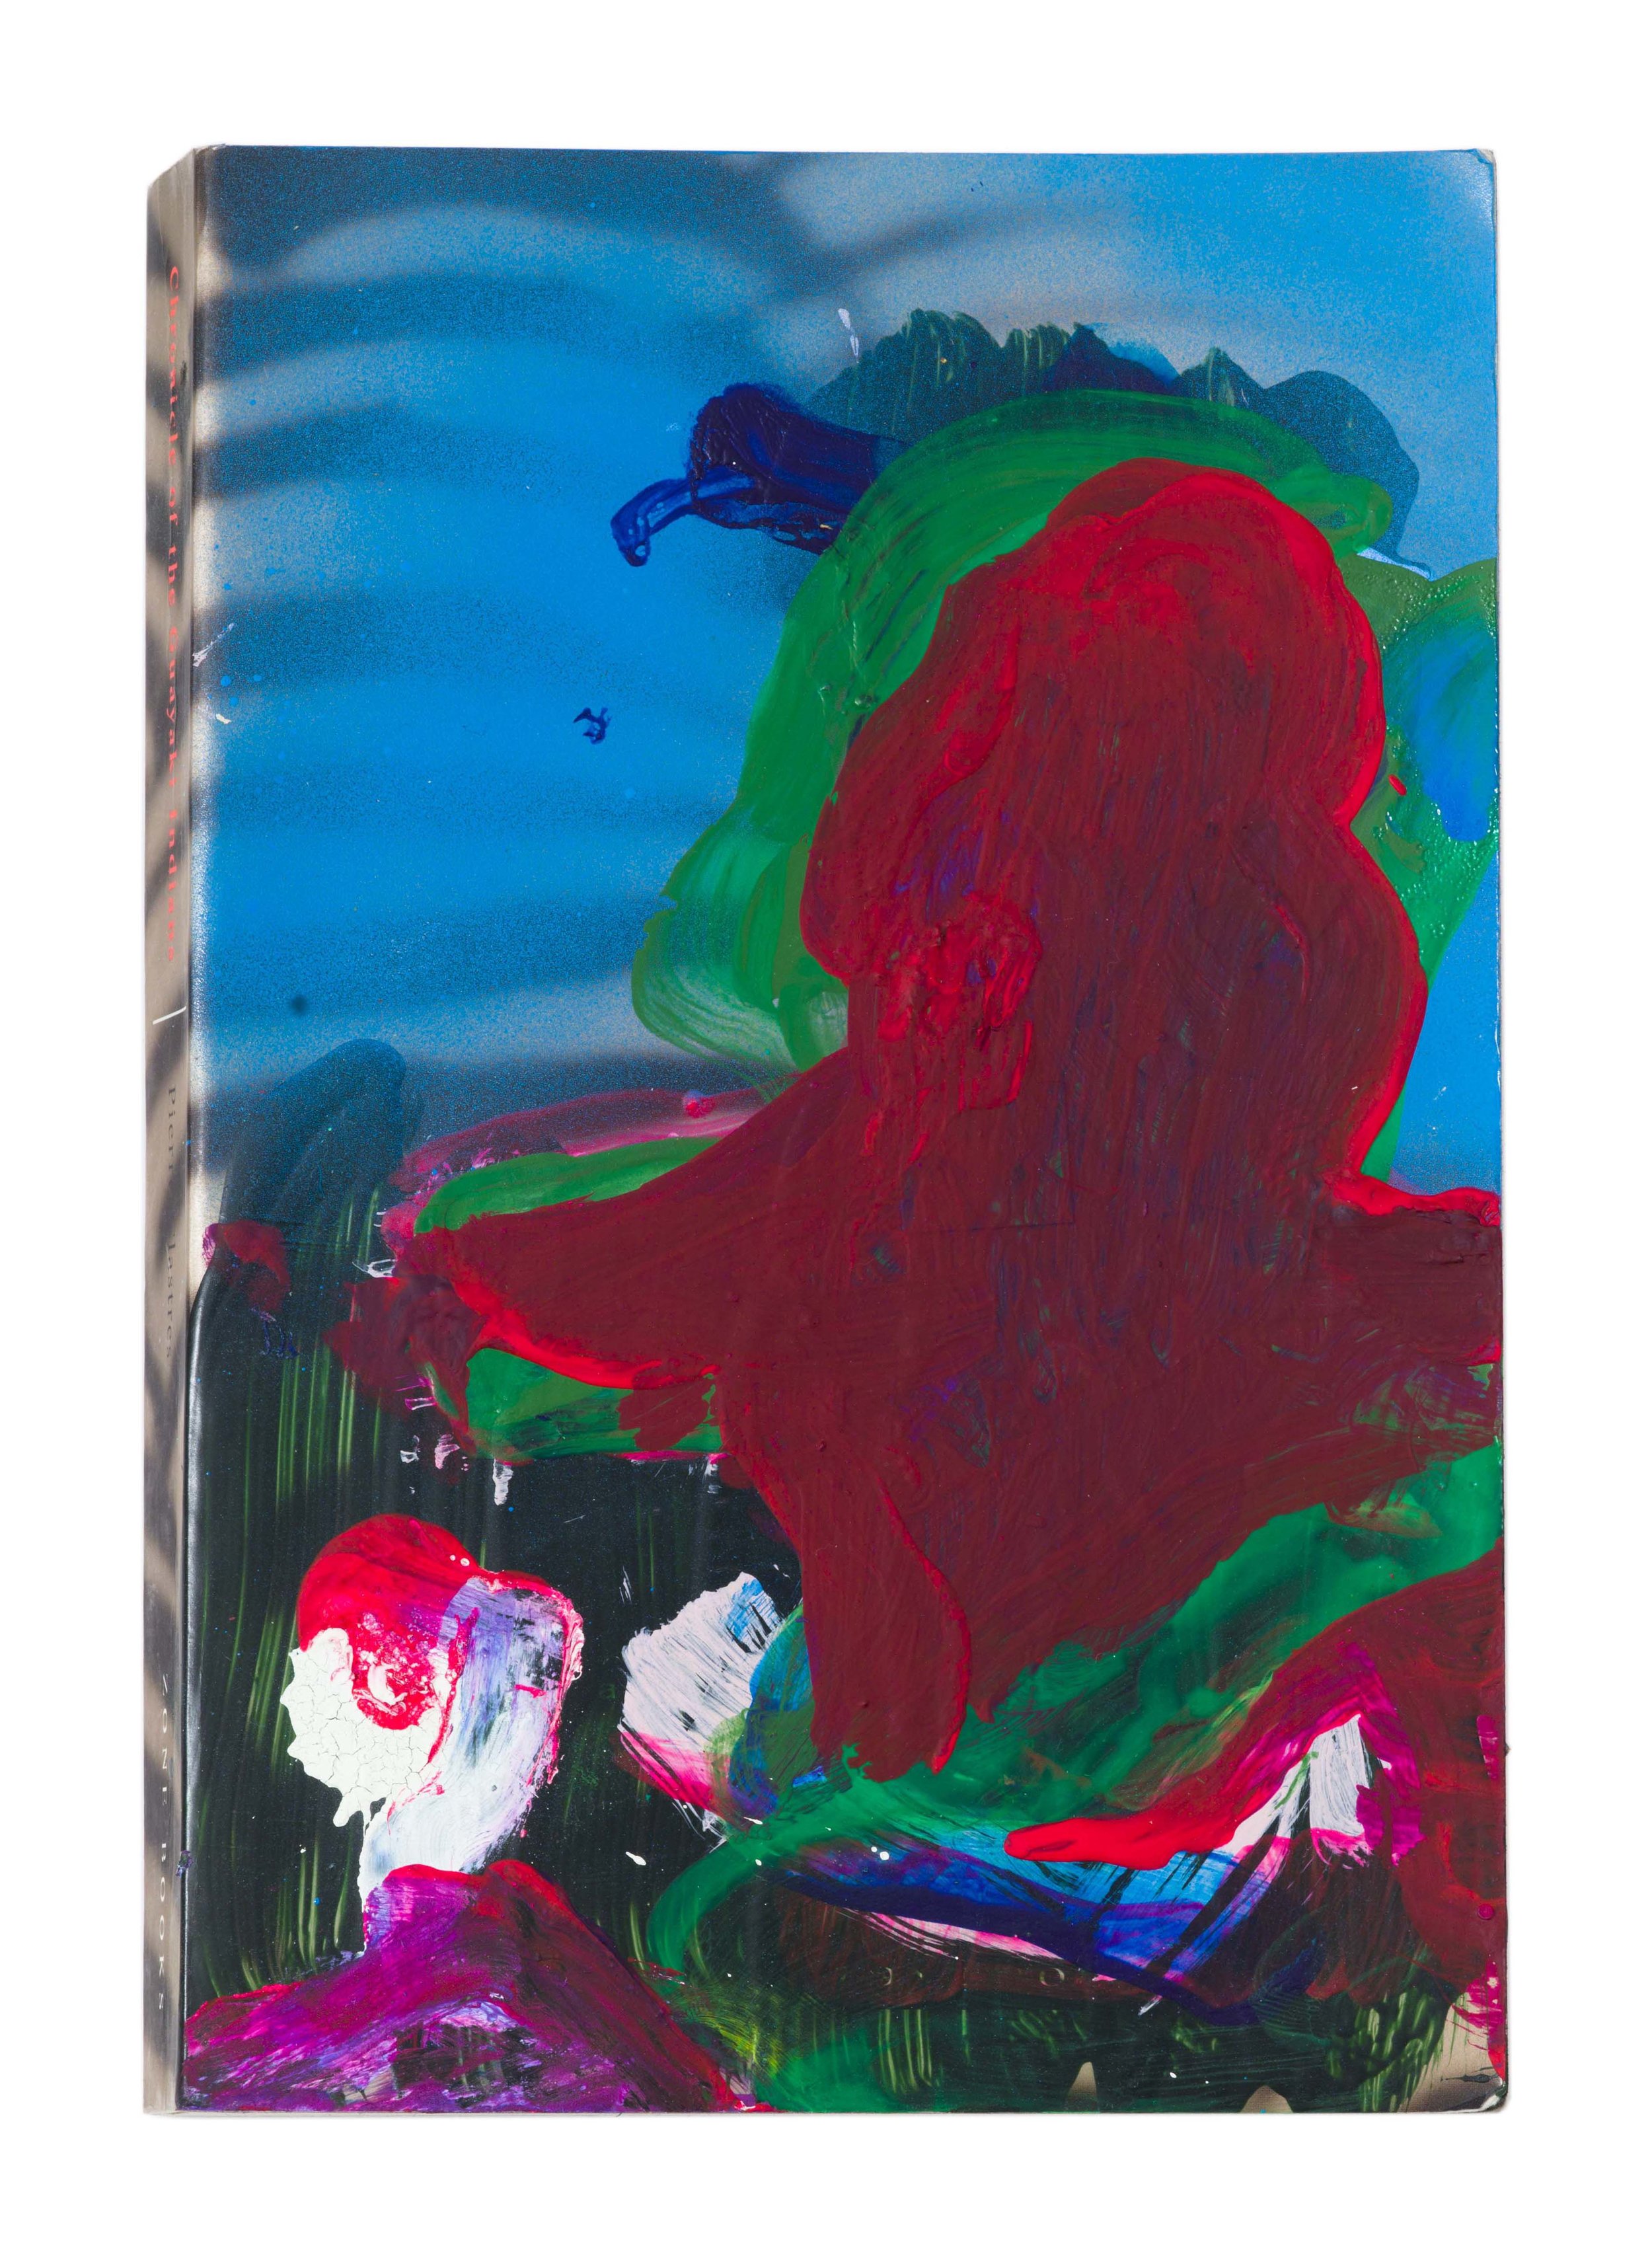  Drew Beattie and Ben Shepard  Chronicle of the Guayaki Indians  acrylic and spray paint on used book 2016 9 x 6 inches 